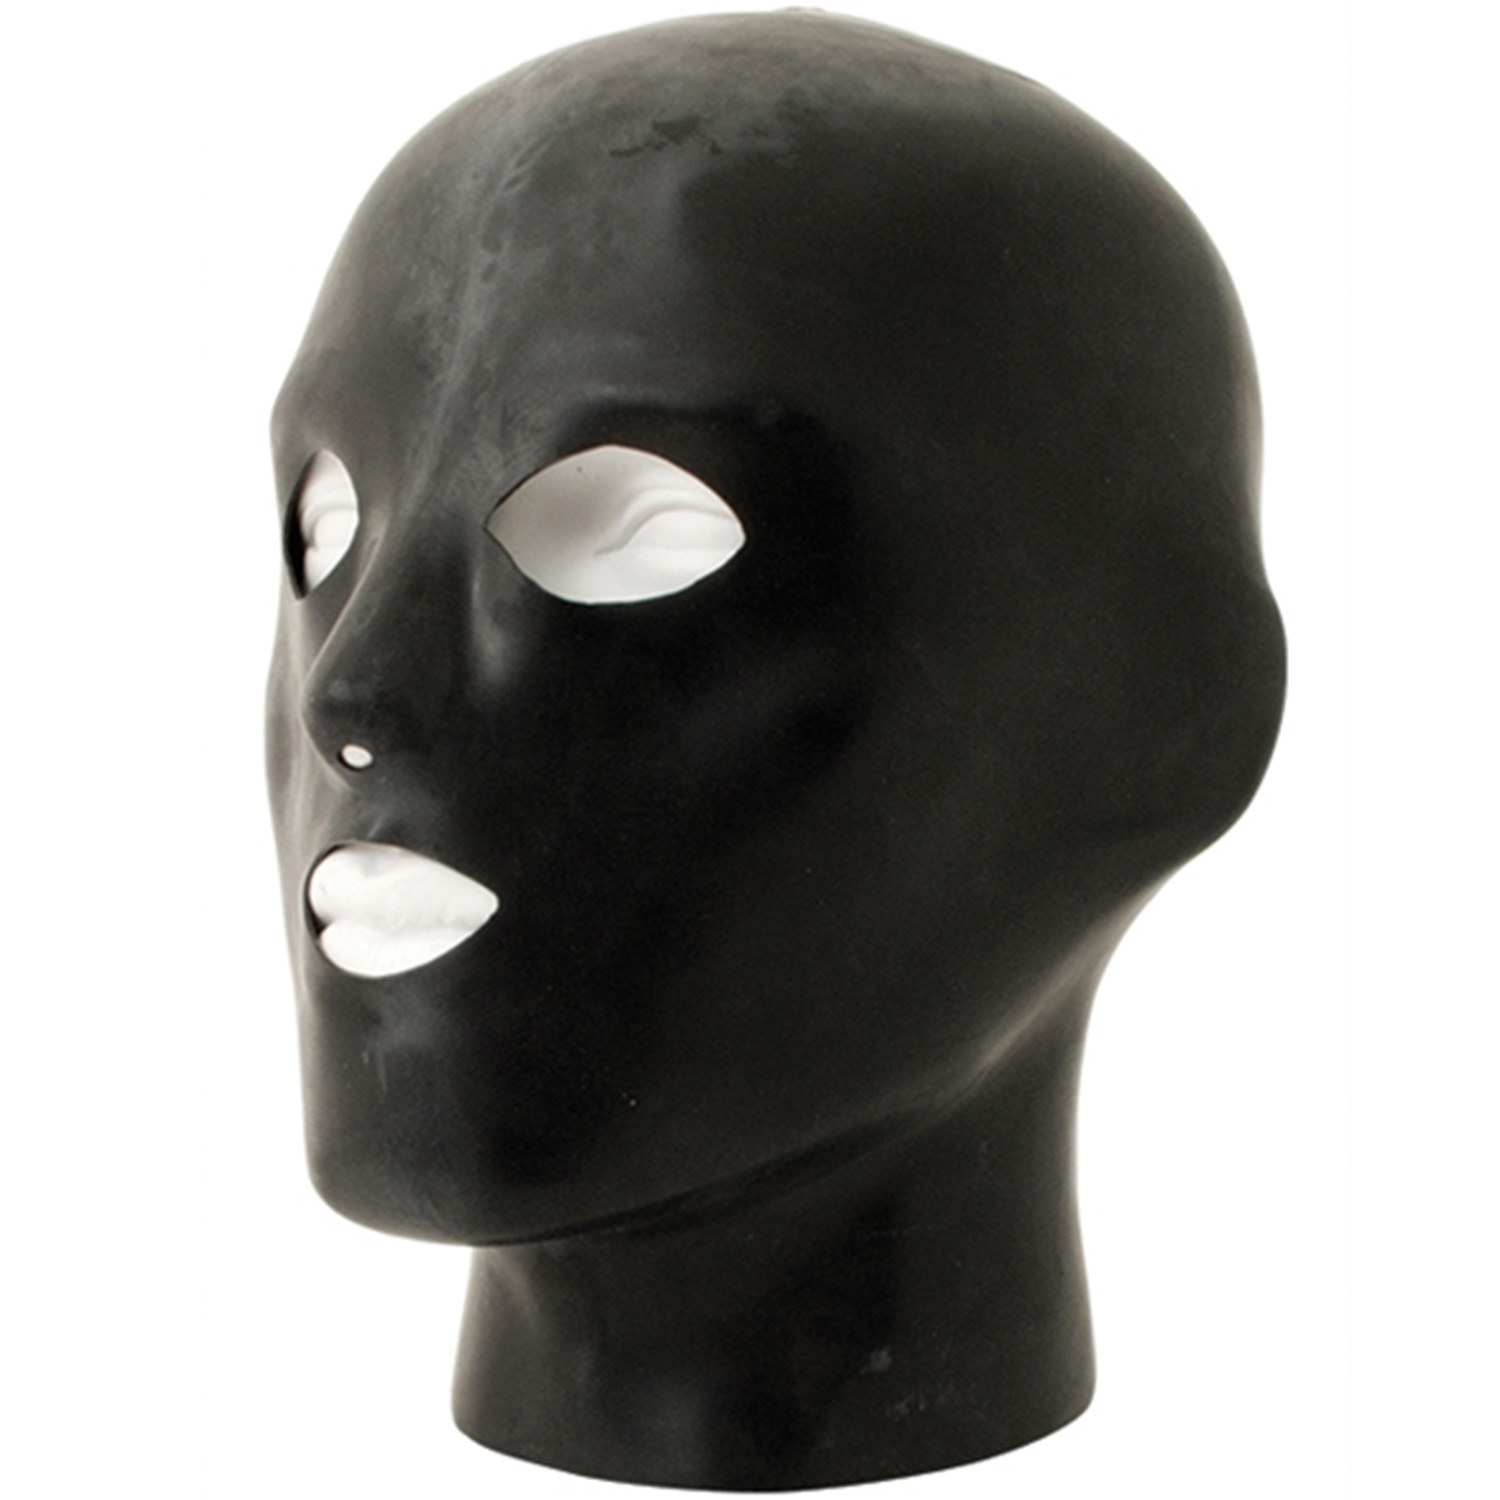 Mister B Rubber Heavy Duty Anatomical Hood With Holes   - Sort - S/M thumbnail